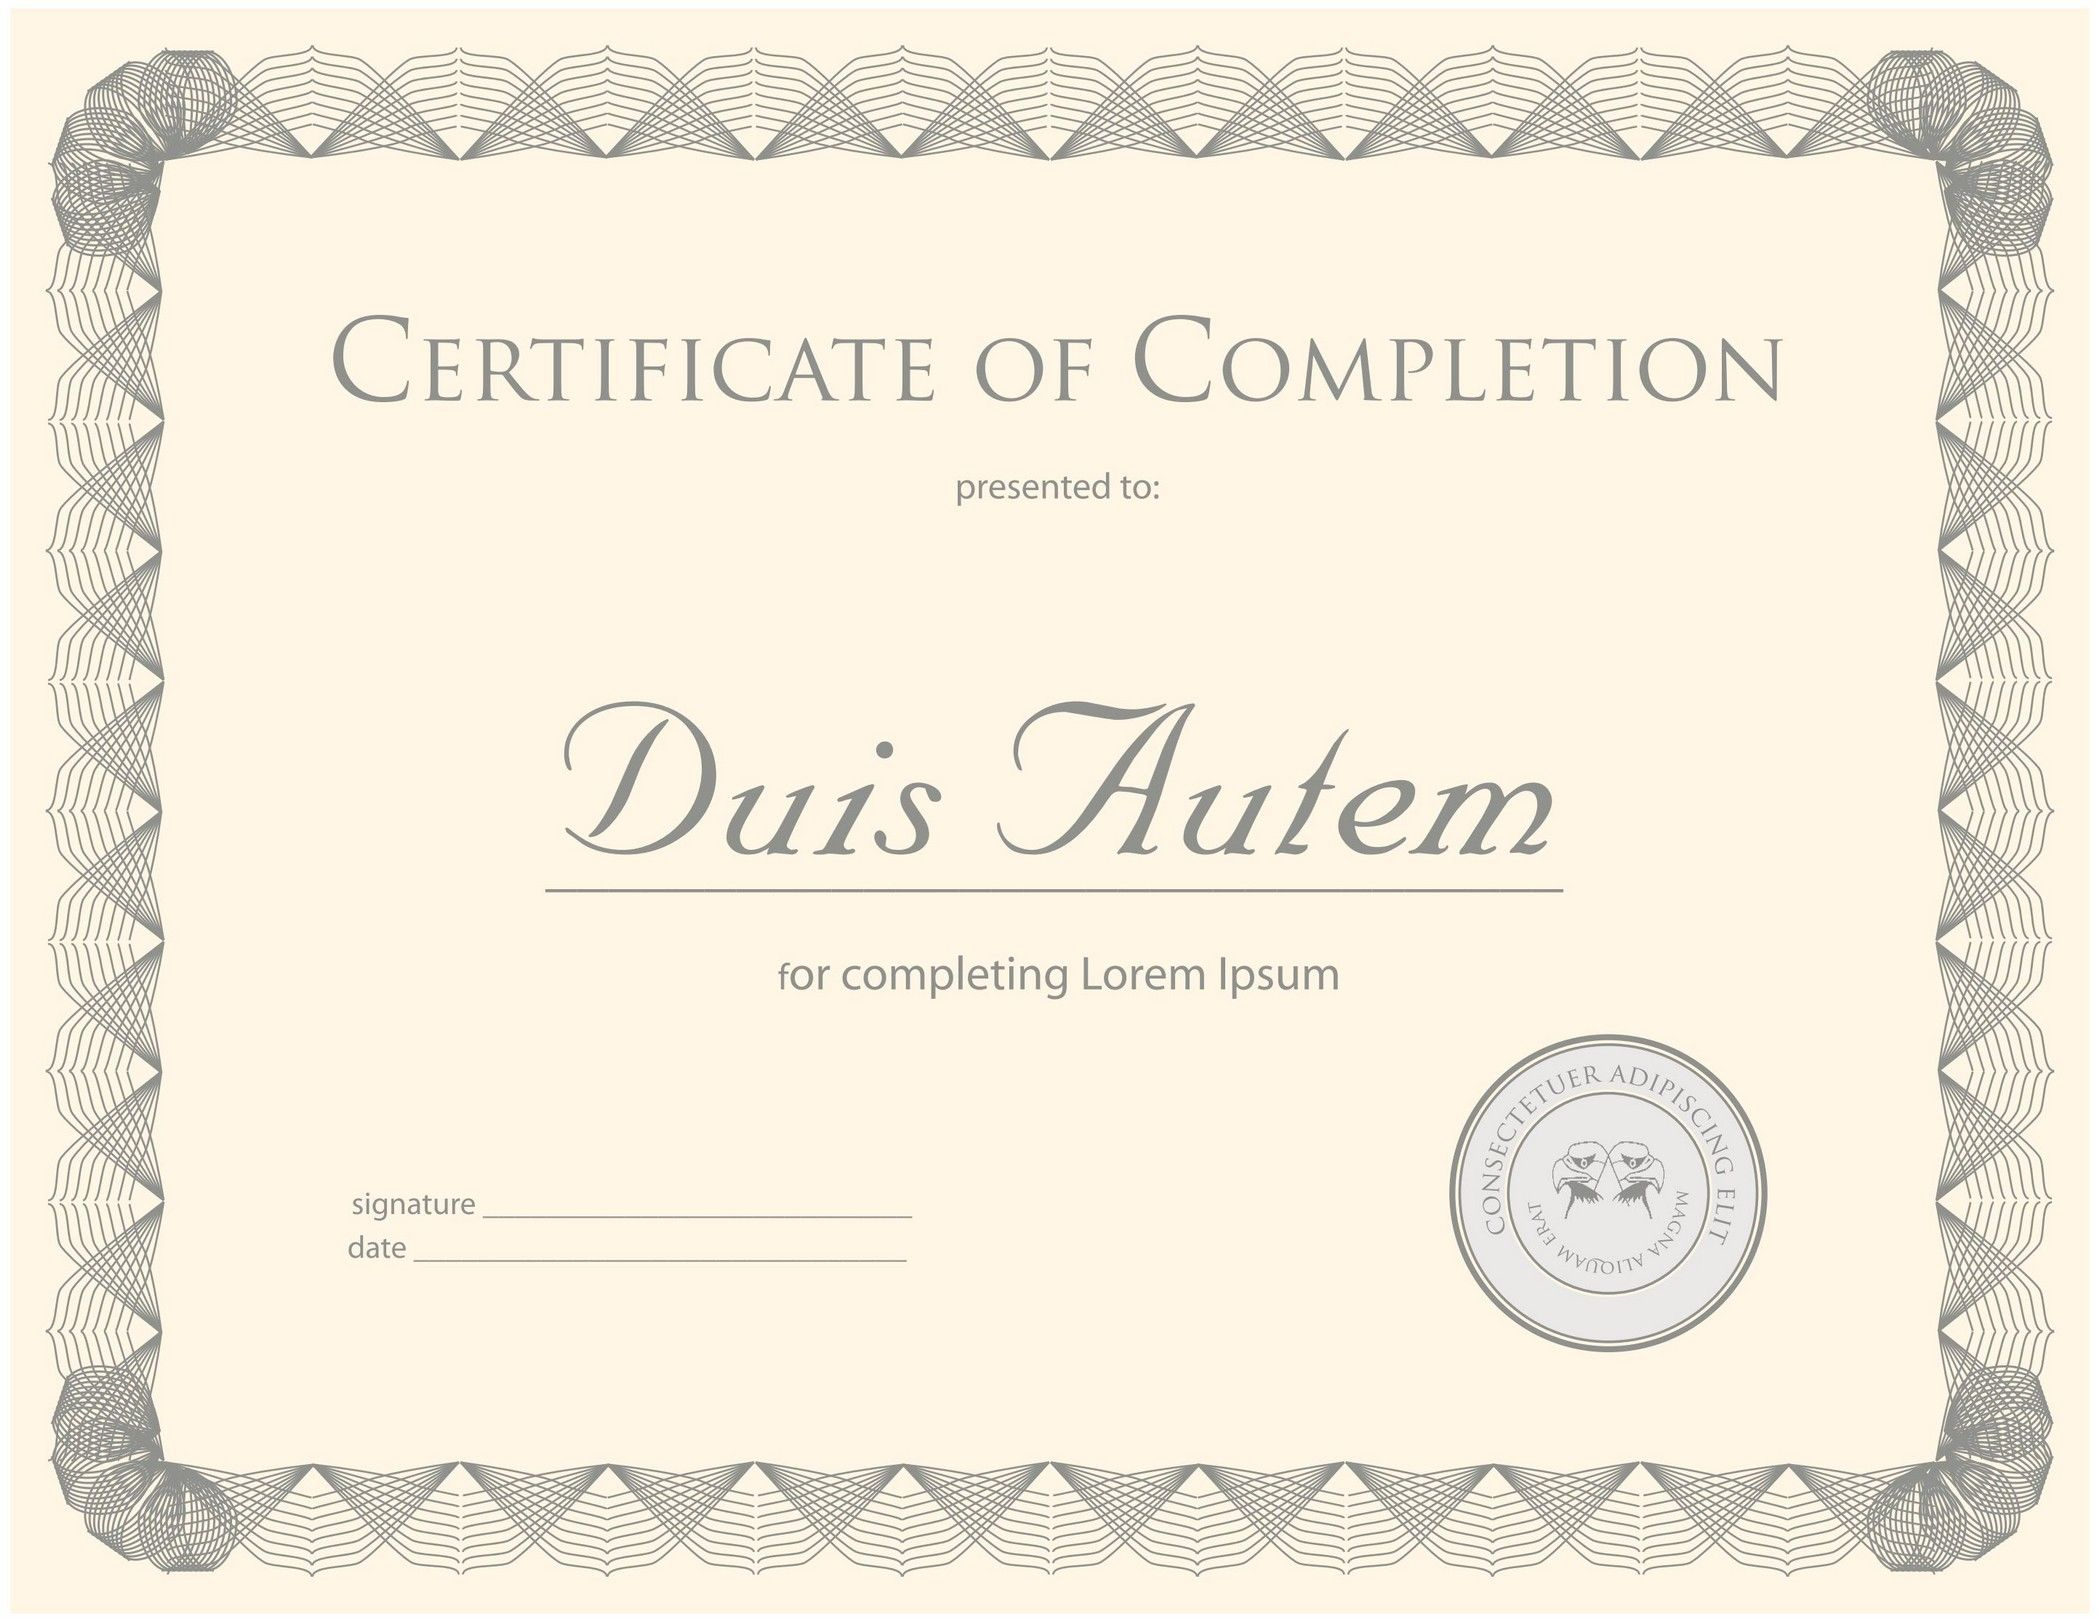 Certificate Templates03 | Norway | Certificate Templates For This Entitles The Bearer To Template Certificate